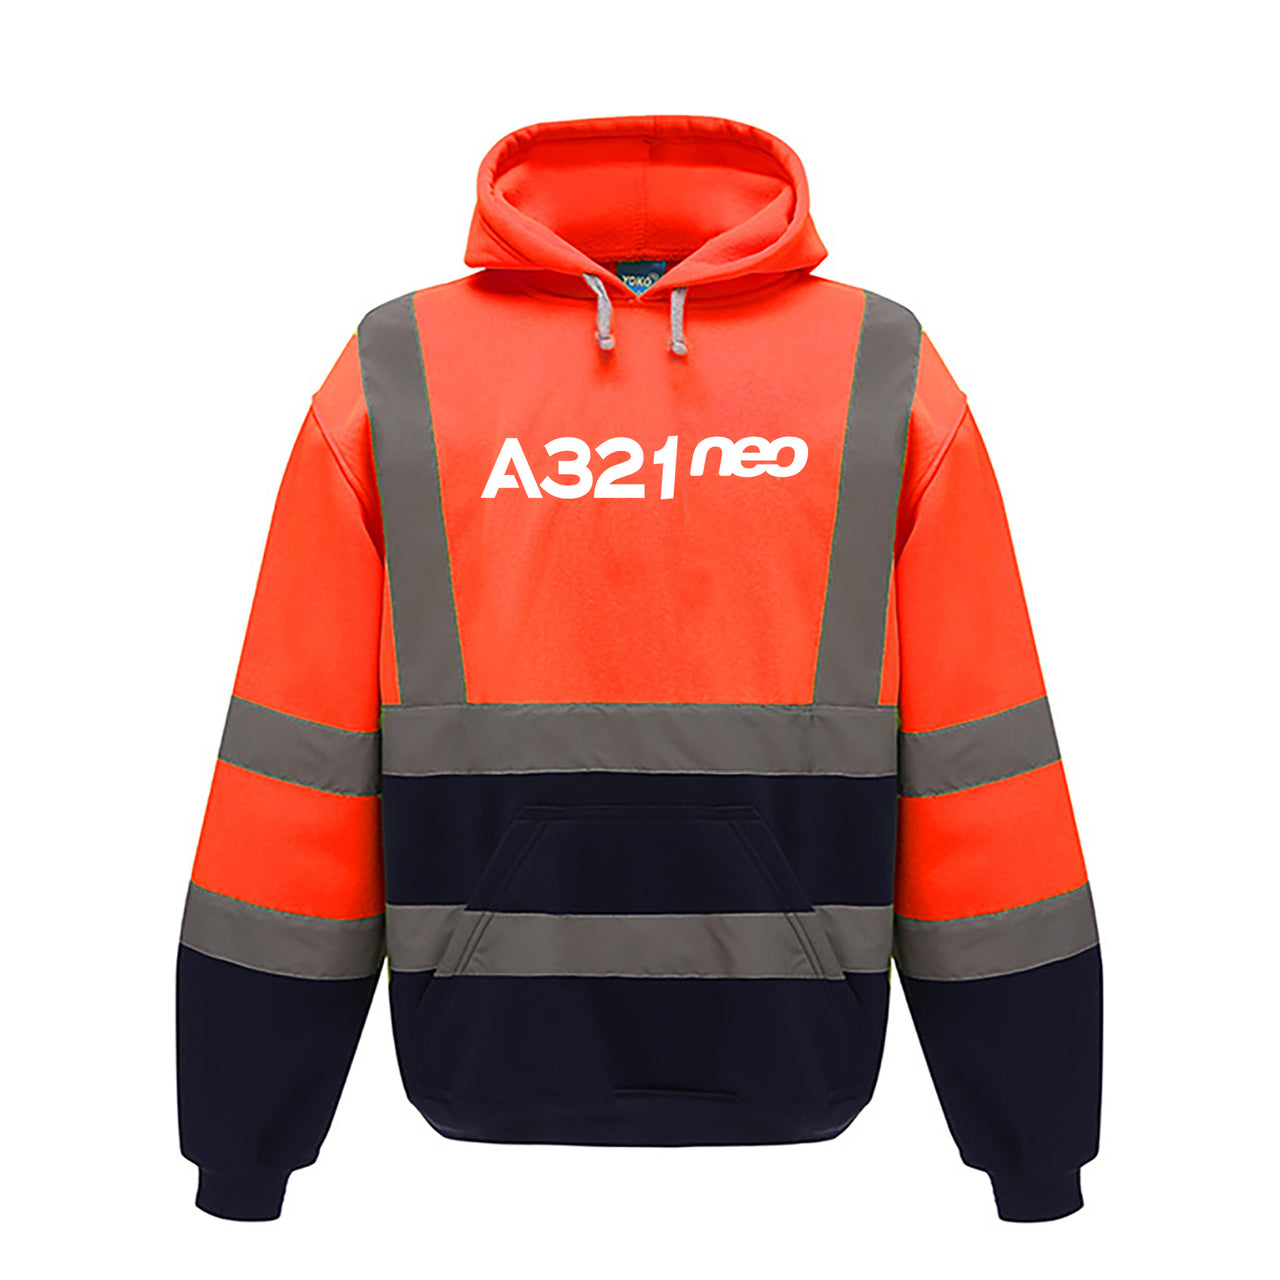 A321neo & Text Designed Reflective Hoodies